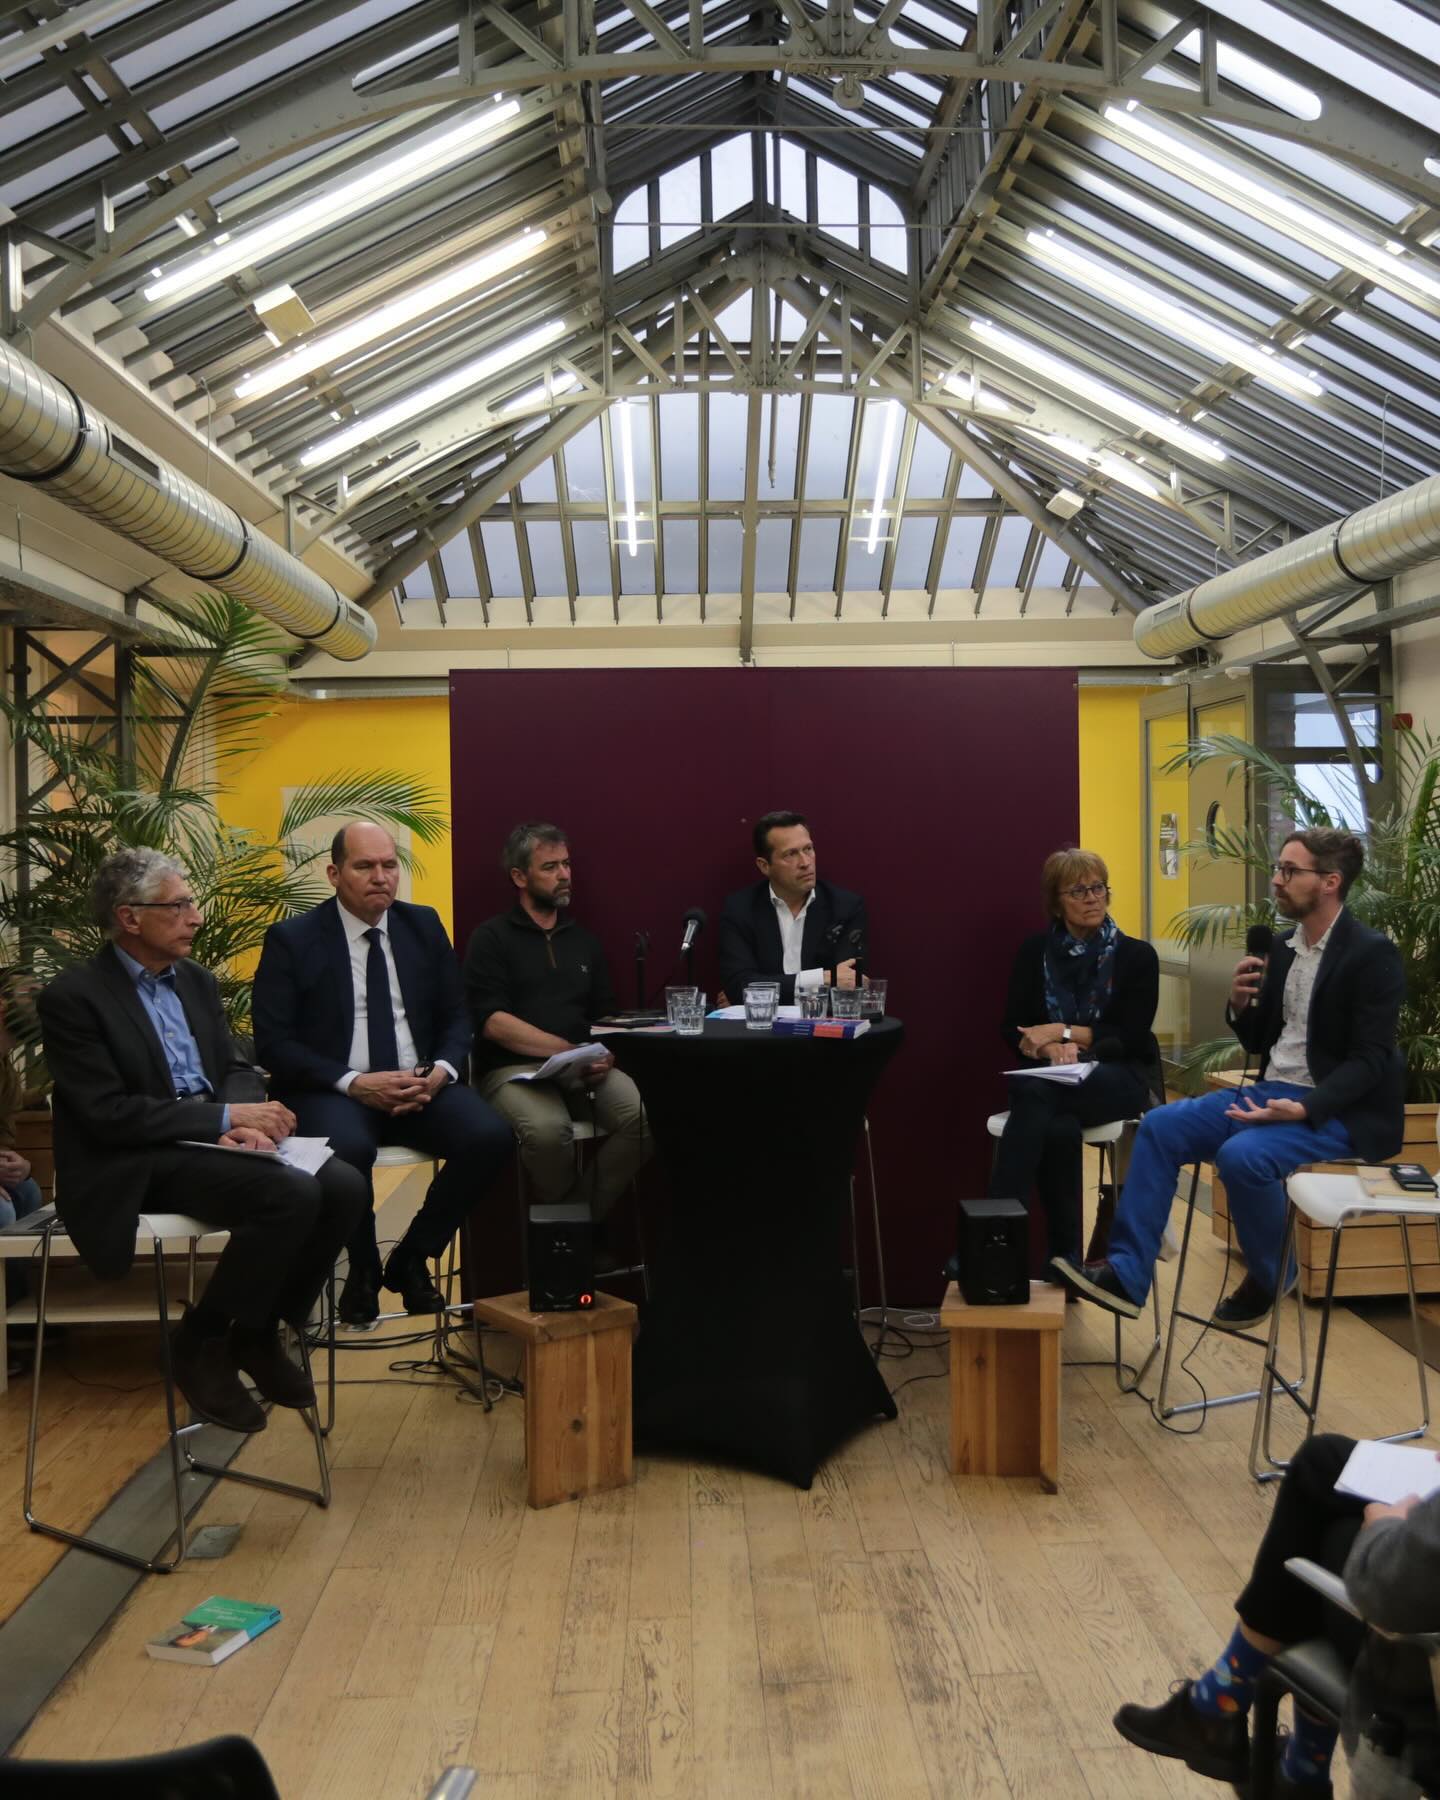 , the non-profit organization Promote Ukraine and Resu invited French-speaking Belgian parties to debate various subjects linked to the war in Ukraine